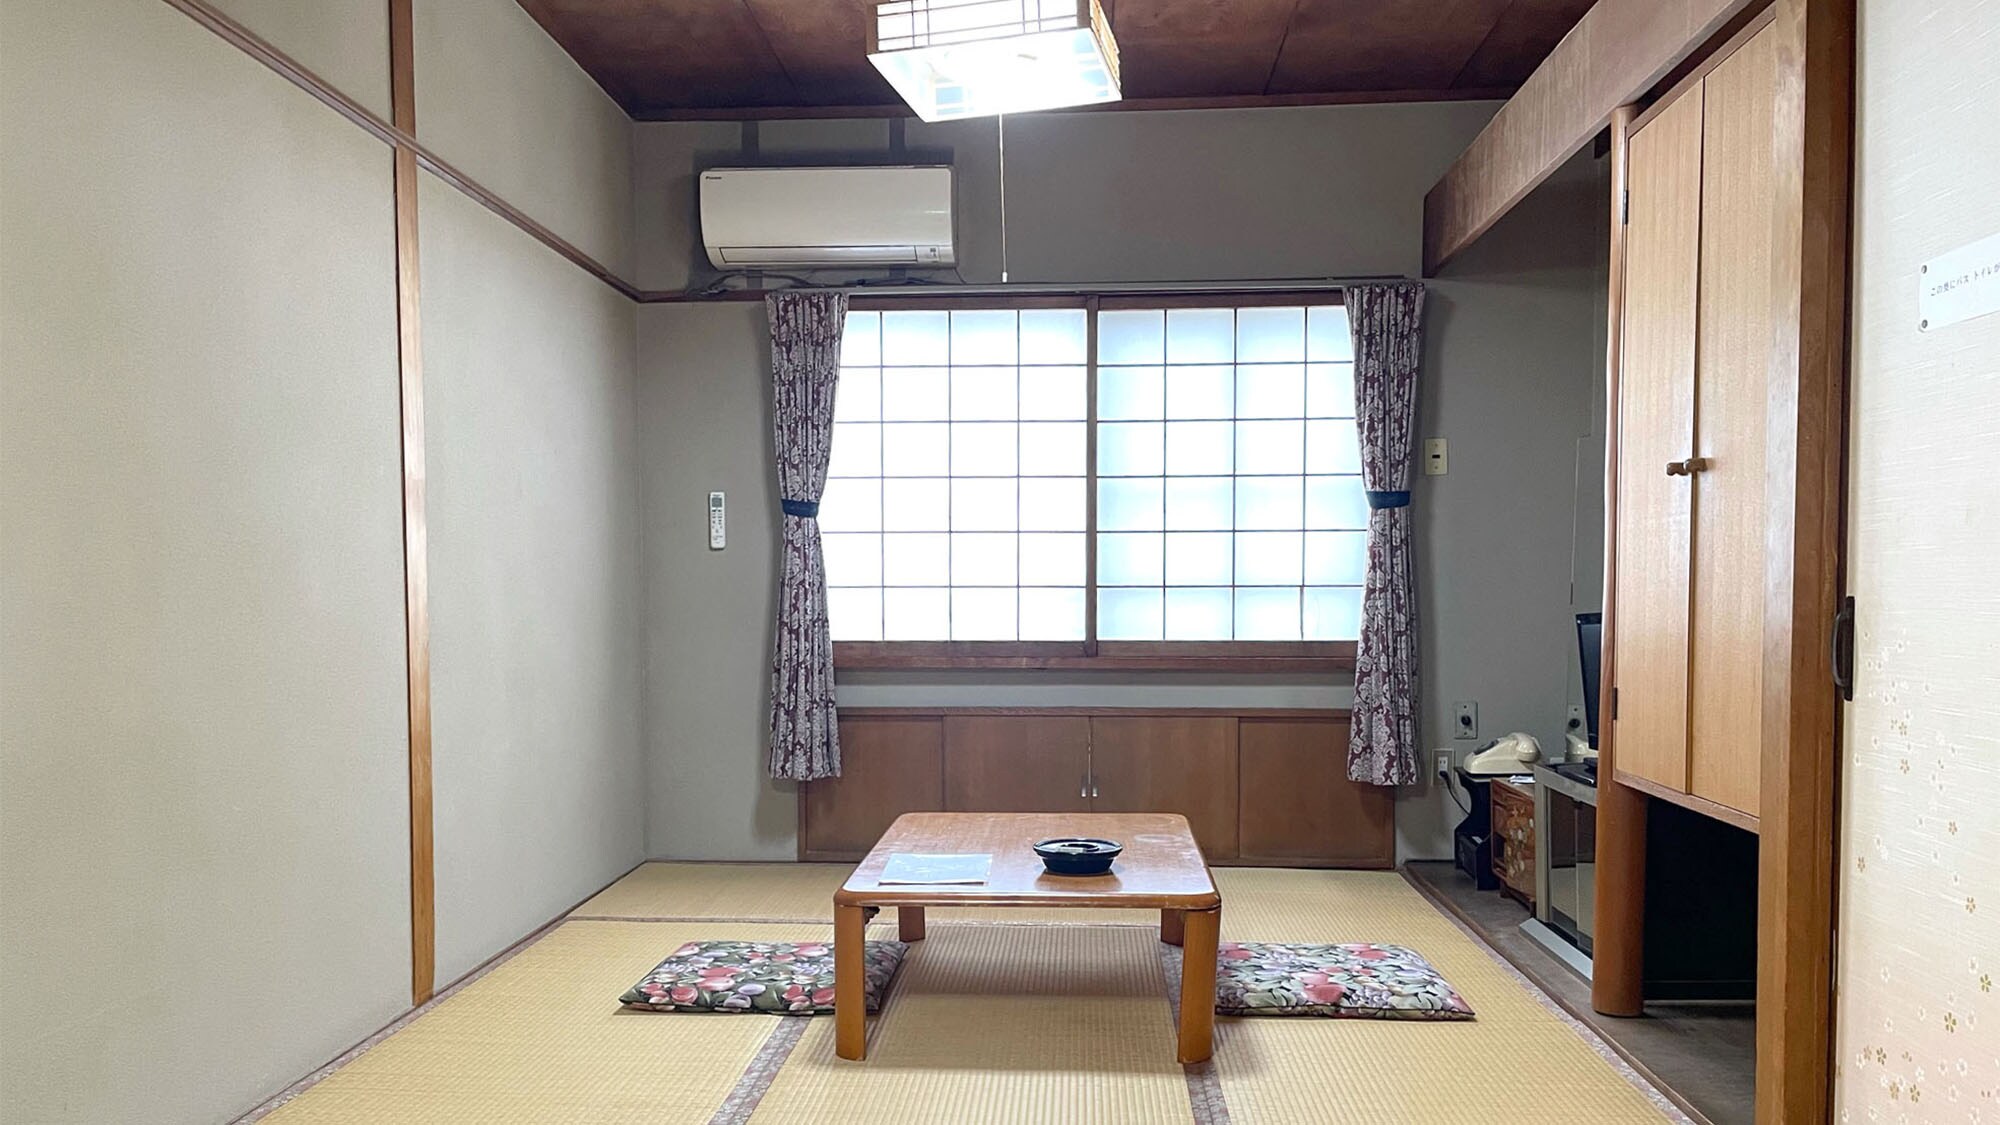 ・ [Example of guest room] Japanese-style room 9 tatami mats